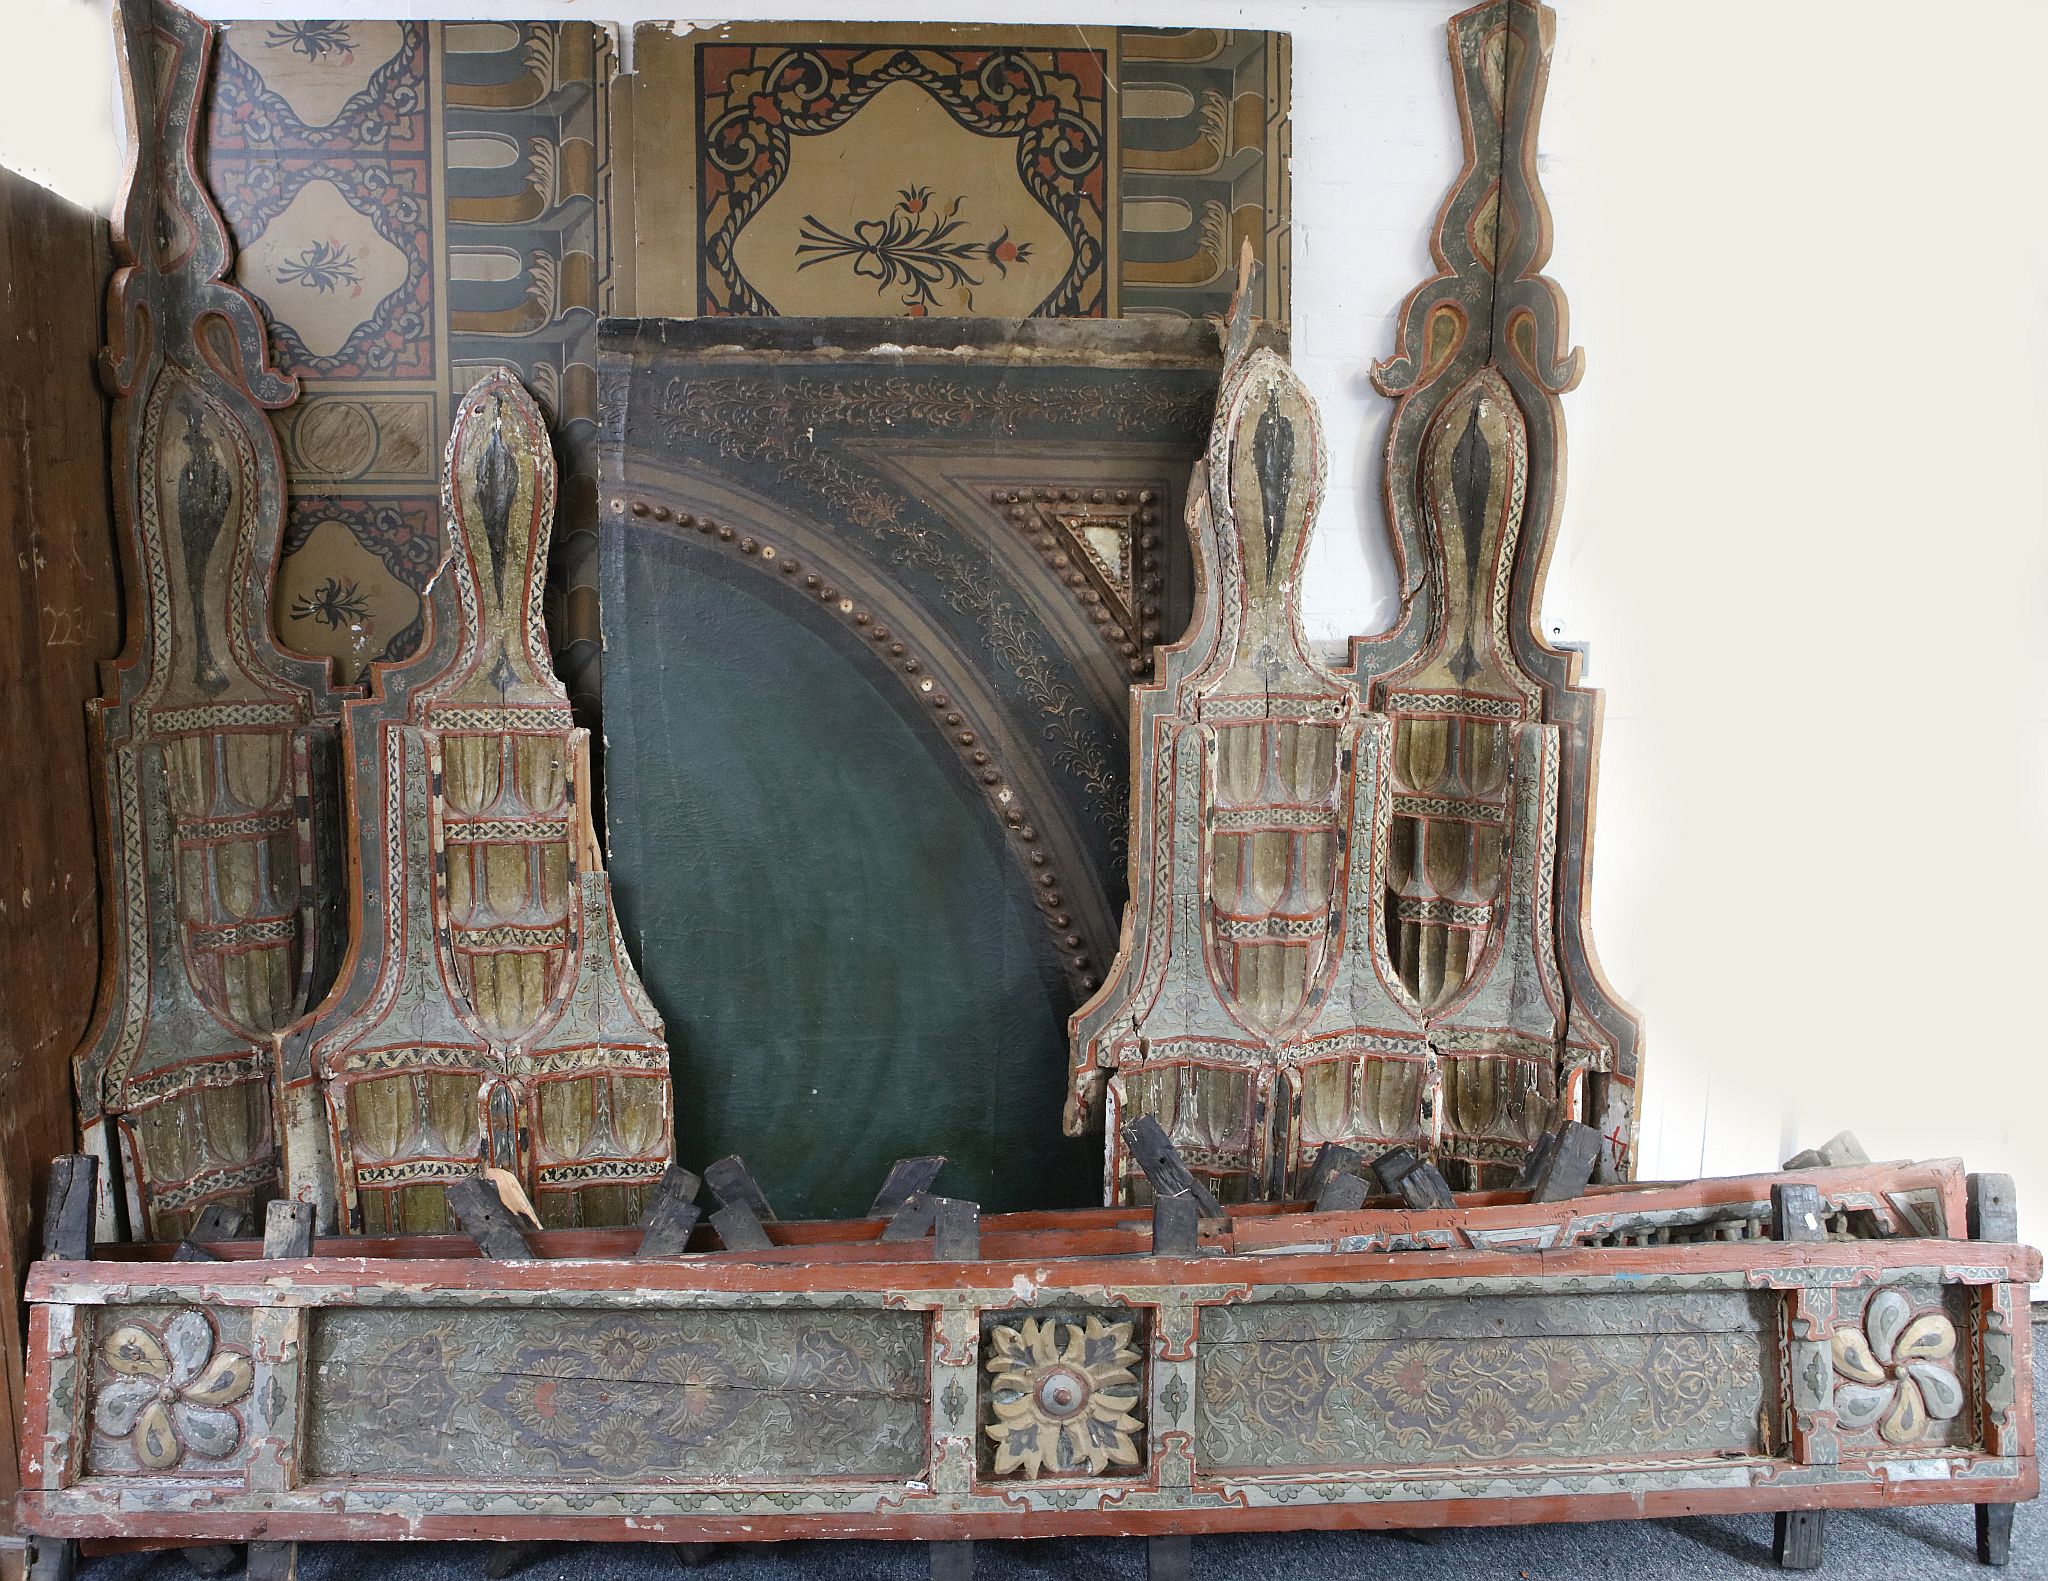 A LATE 18TH / EARLY 19TH CENTURY SYRIAN (DAMASCUS) DECORATIVE INTERIOR / ROOM comprising various